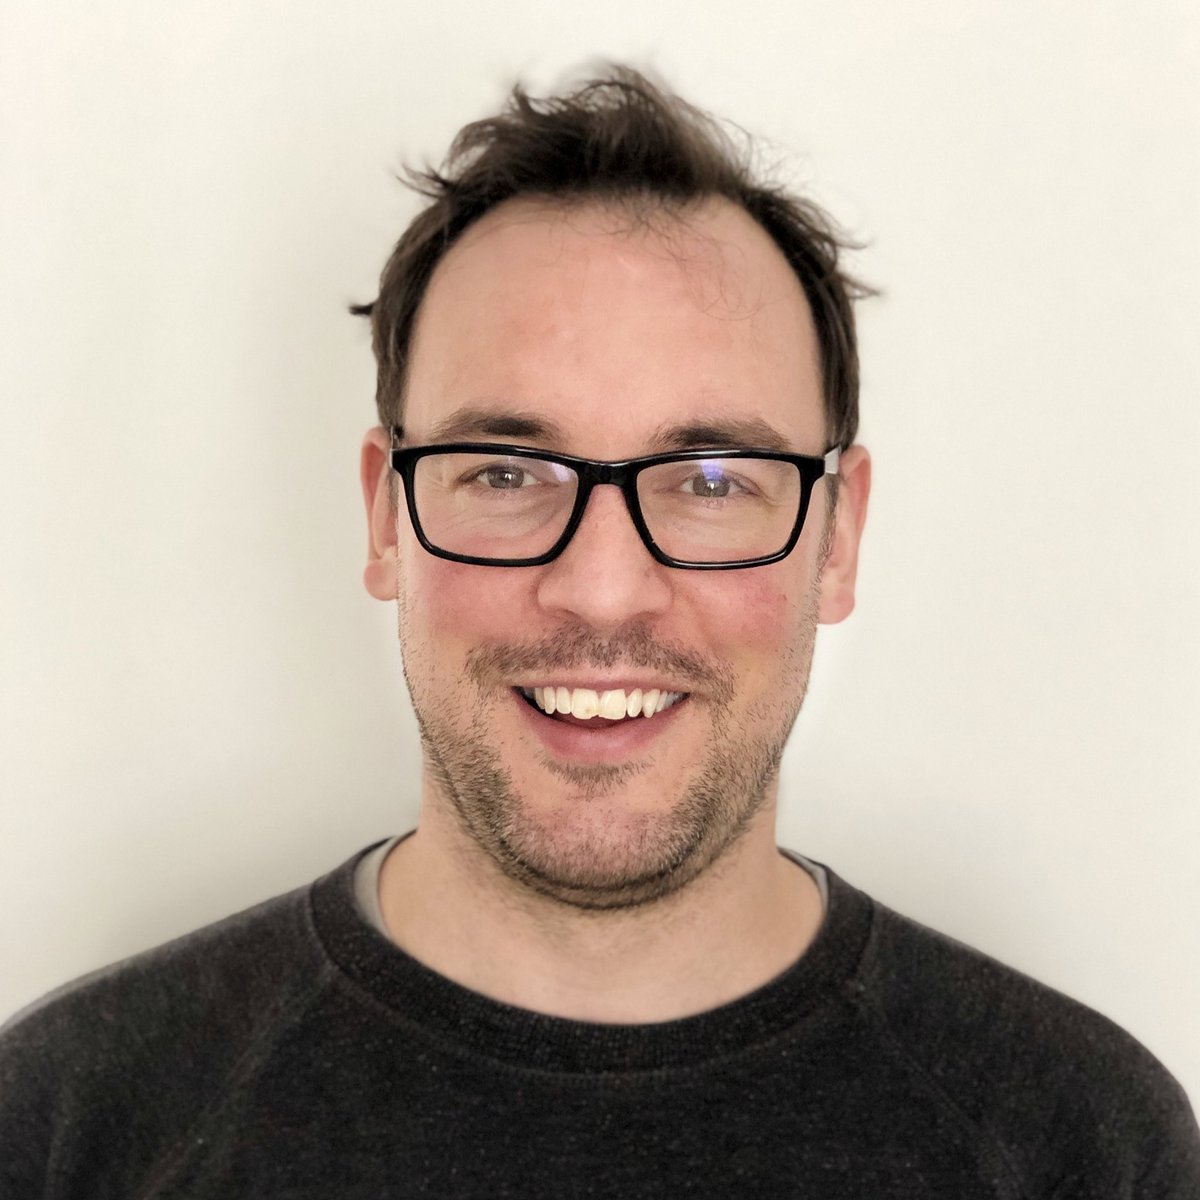 Dr Keith Hodgson, ST7 AnaesEdinburgh   Vice Chair  @Anaes_Trainees Interests: anaesthesia for major surgery, improving the systems we work in. Non-work: being outdoors  swimming  skiing , ultimate frisbee